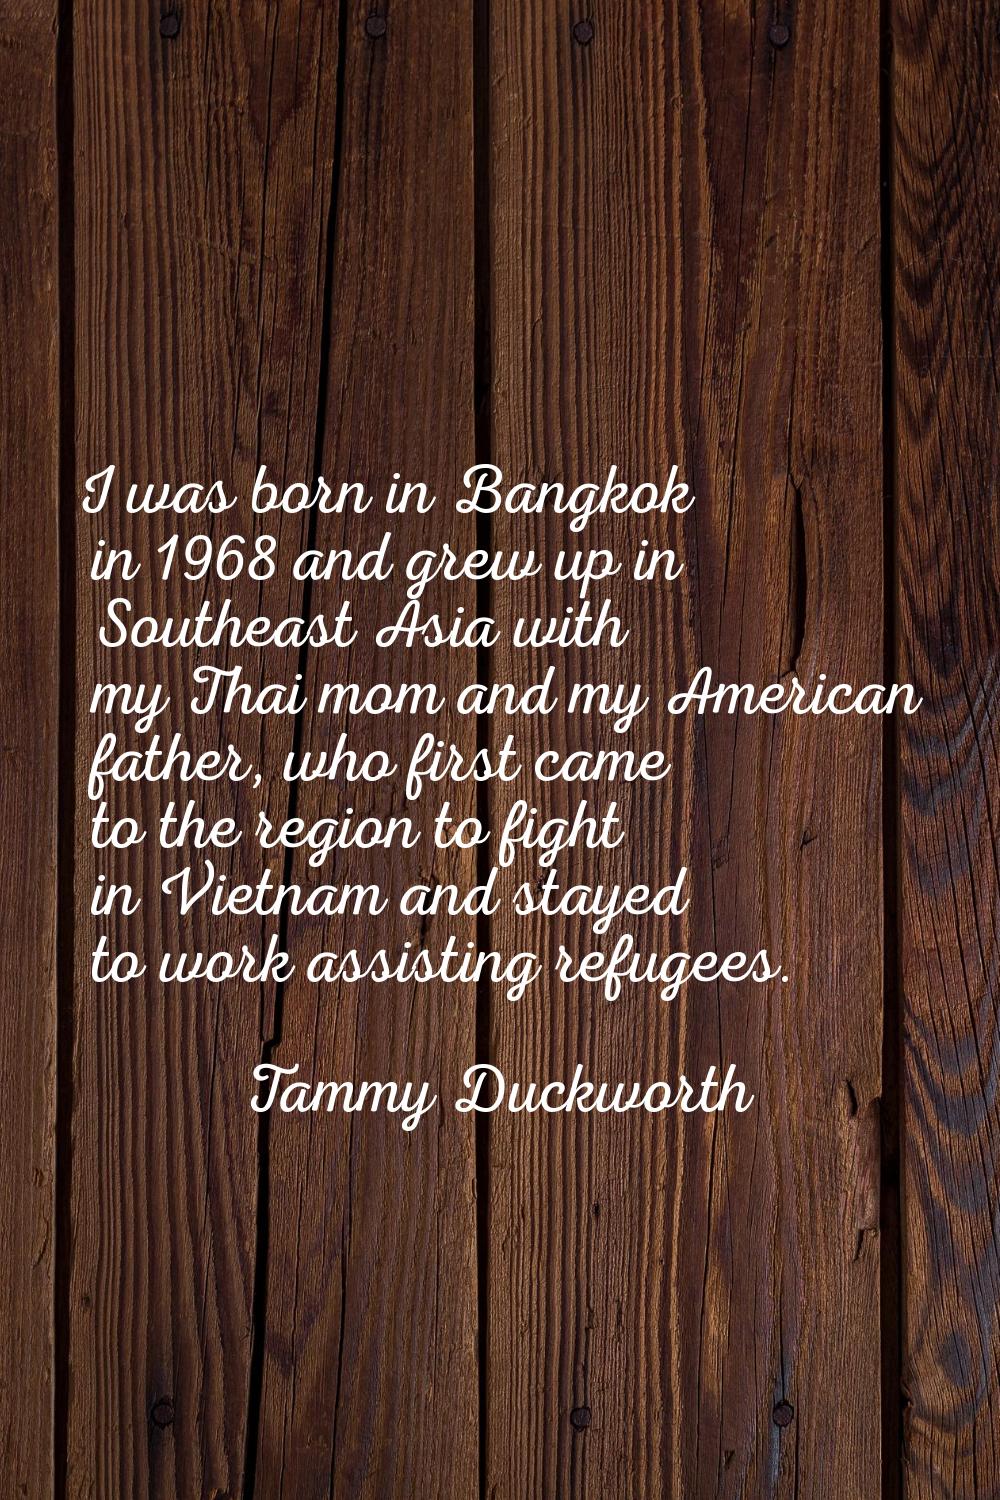 I was born in Bangkok in 1968 and grew up in Southeast Asia with my Thai mom and my American father